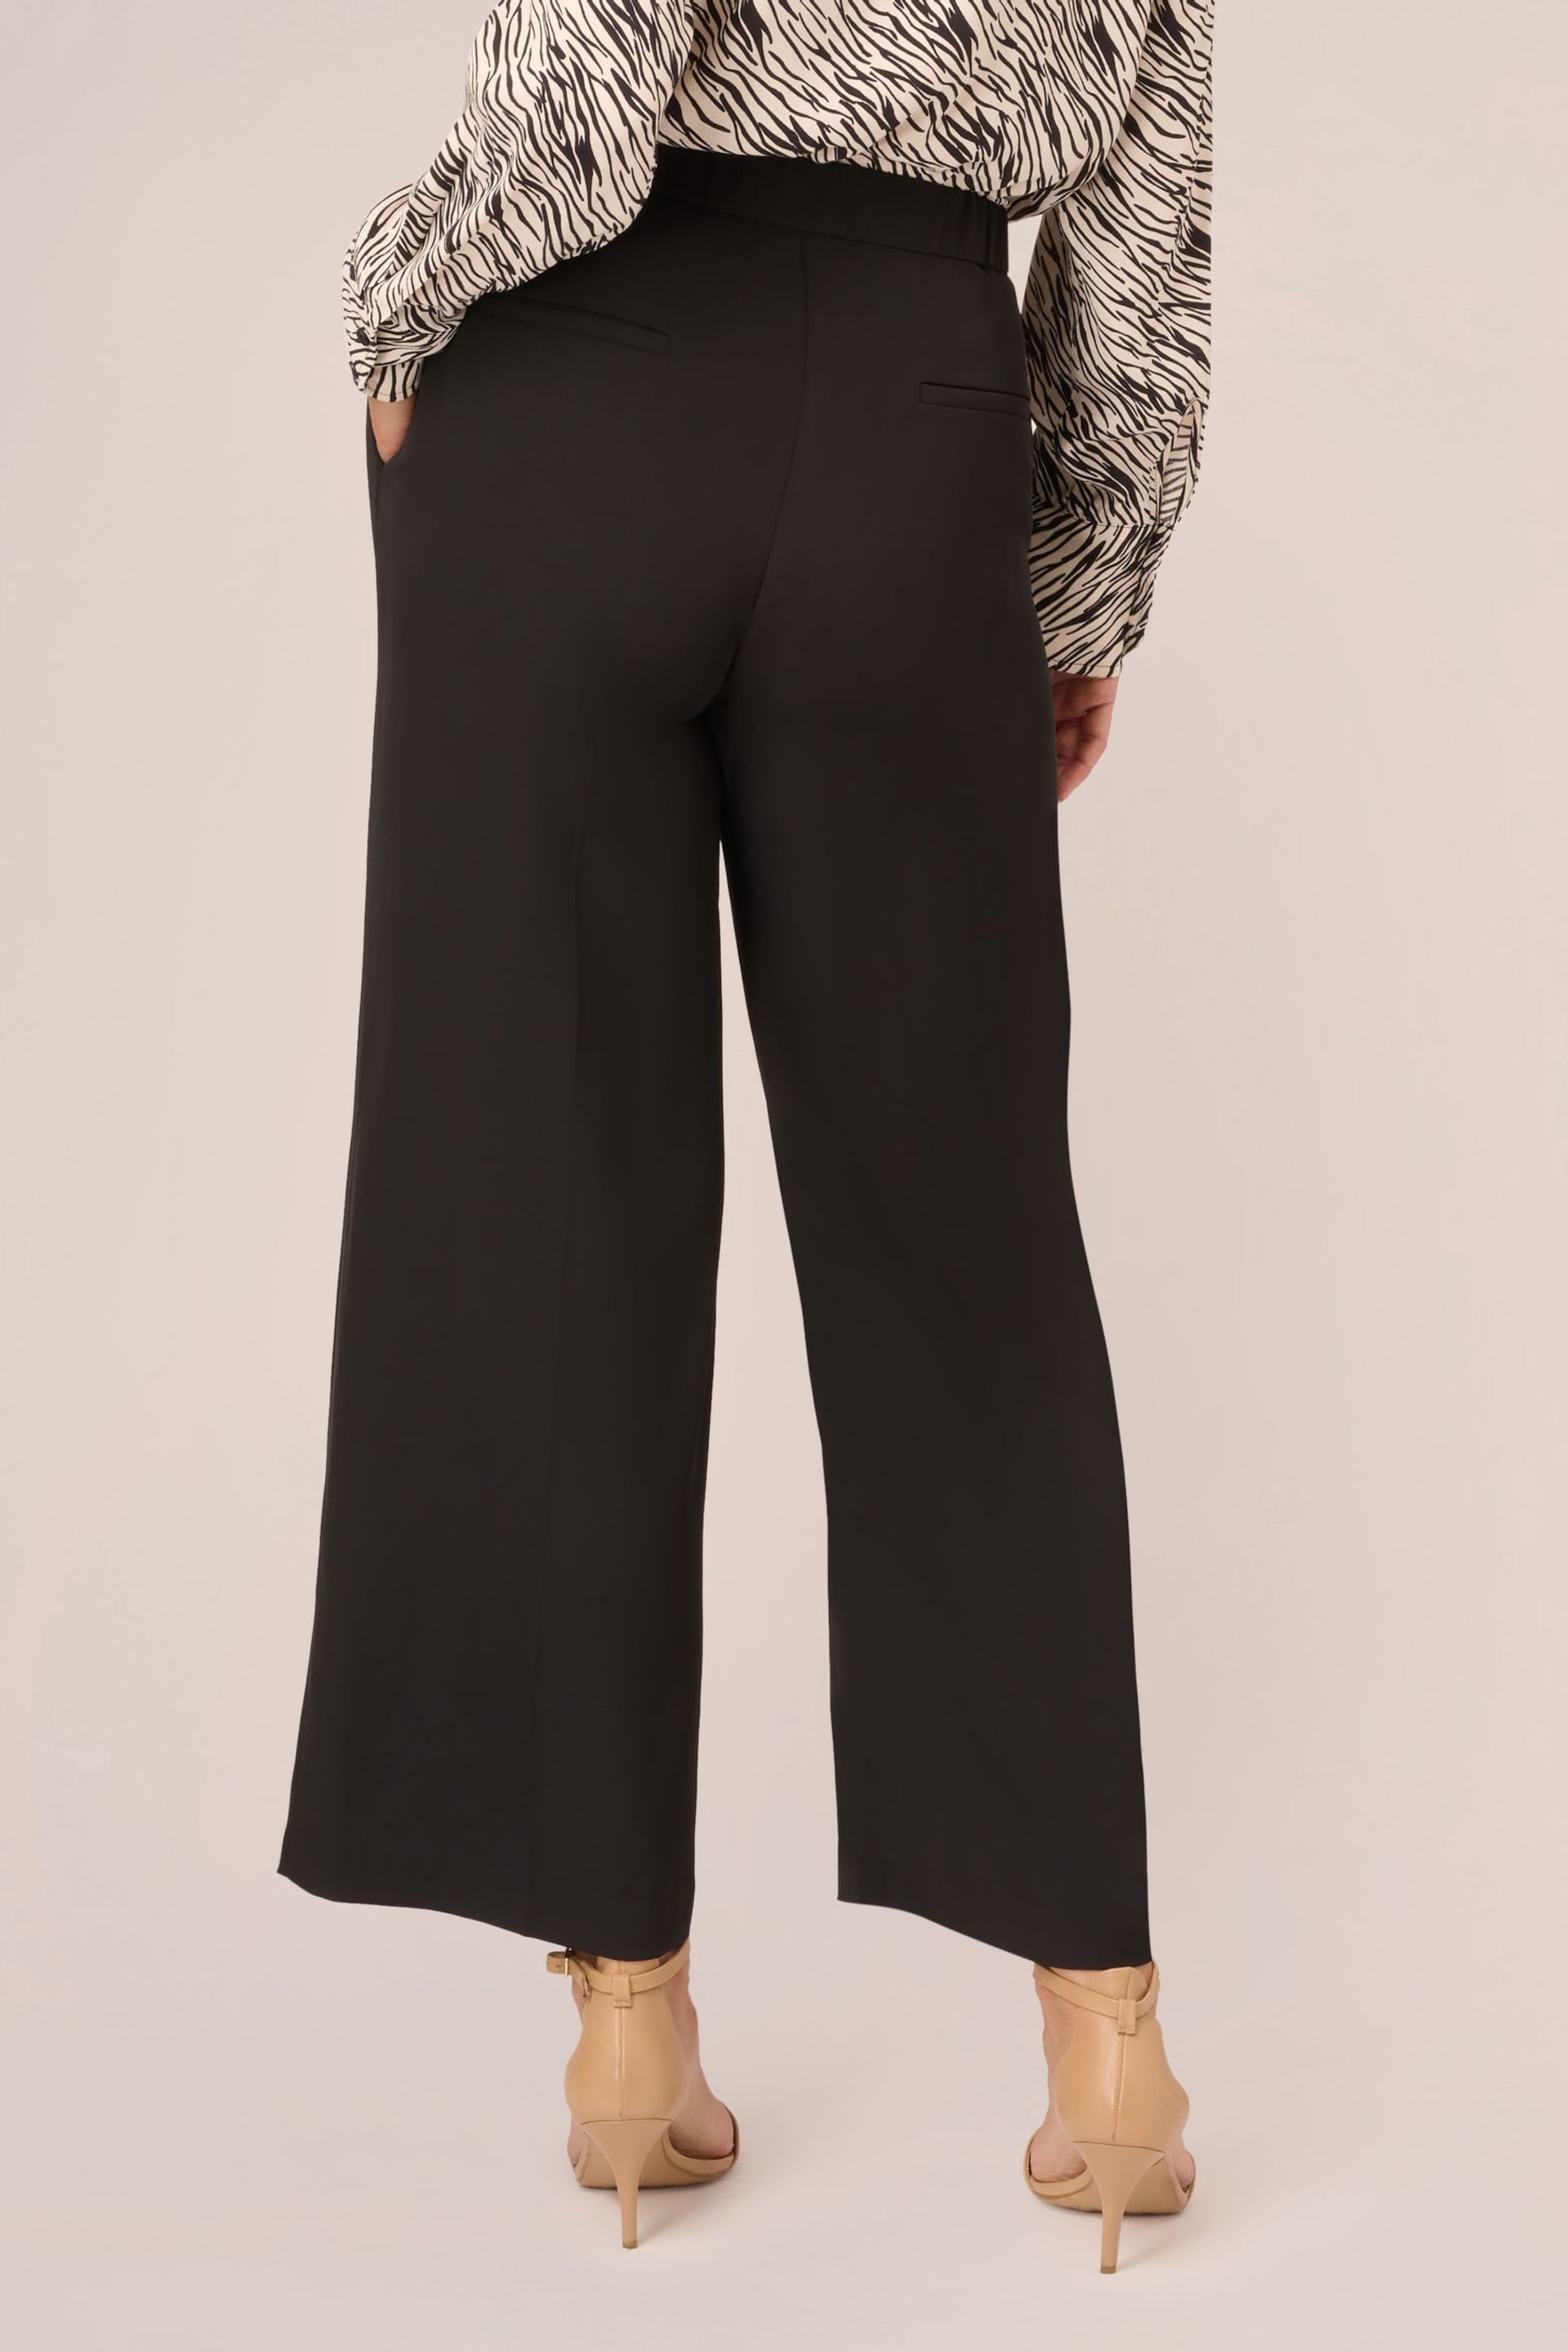 Adrianna Papell Solid Wide Leg Ankle Elastic Back Black Trousers - Image 2 of 6